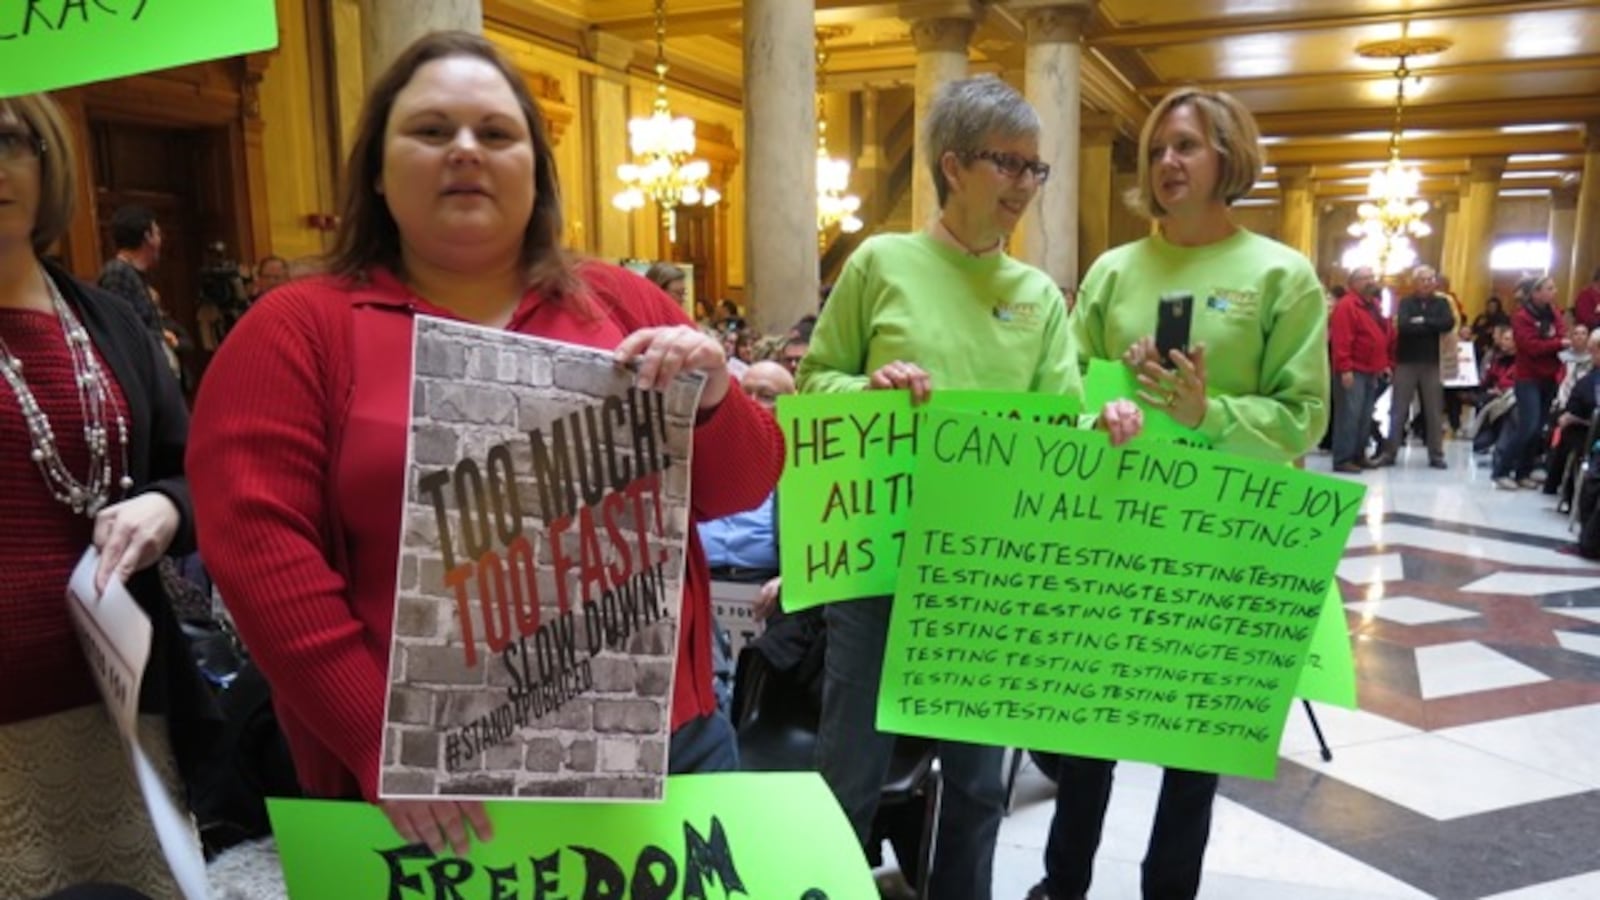 Protesters hold signs criticizing testing and other concerns at a union-led rally at the statehouse last February.